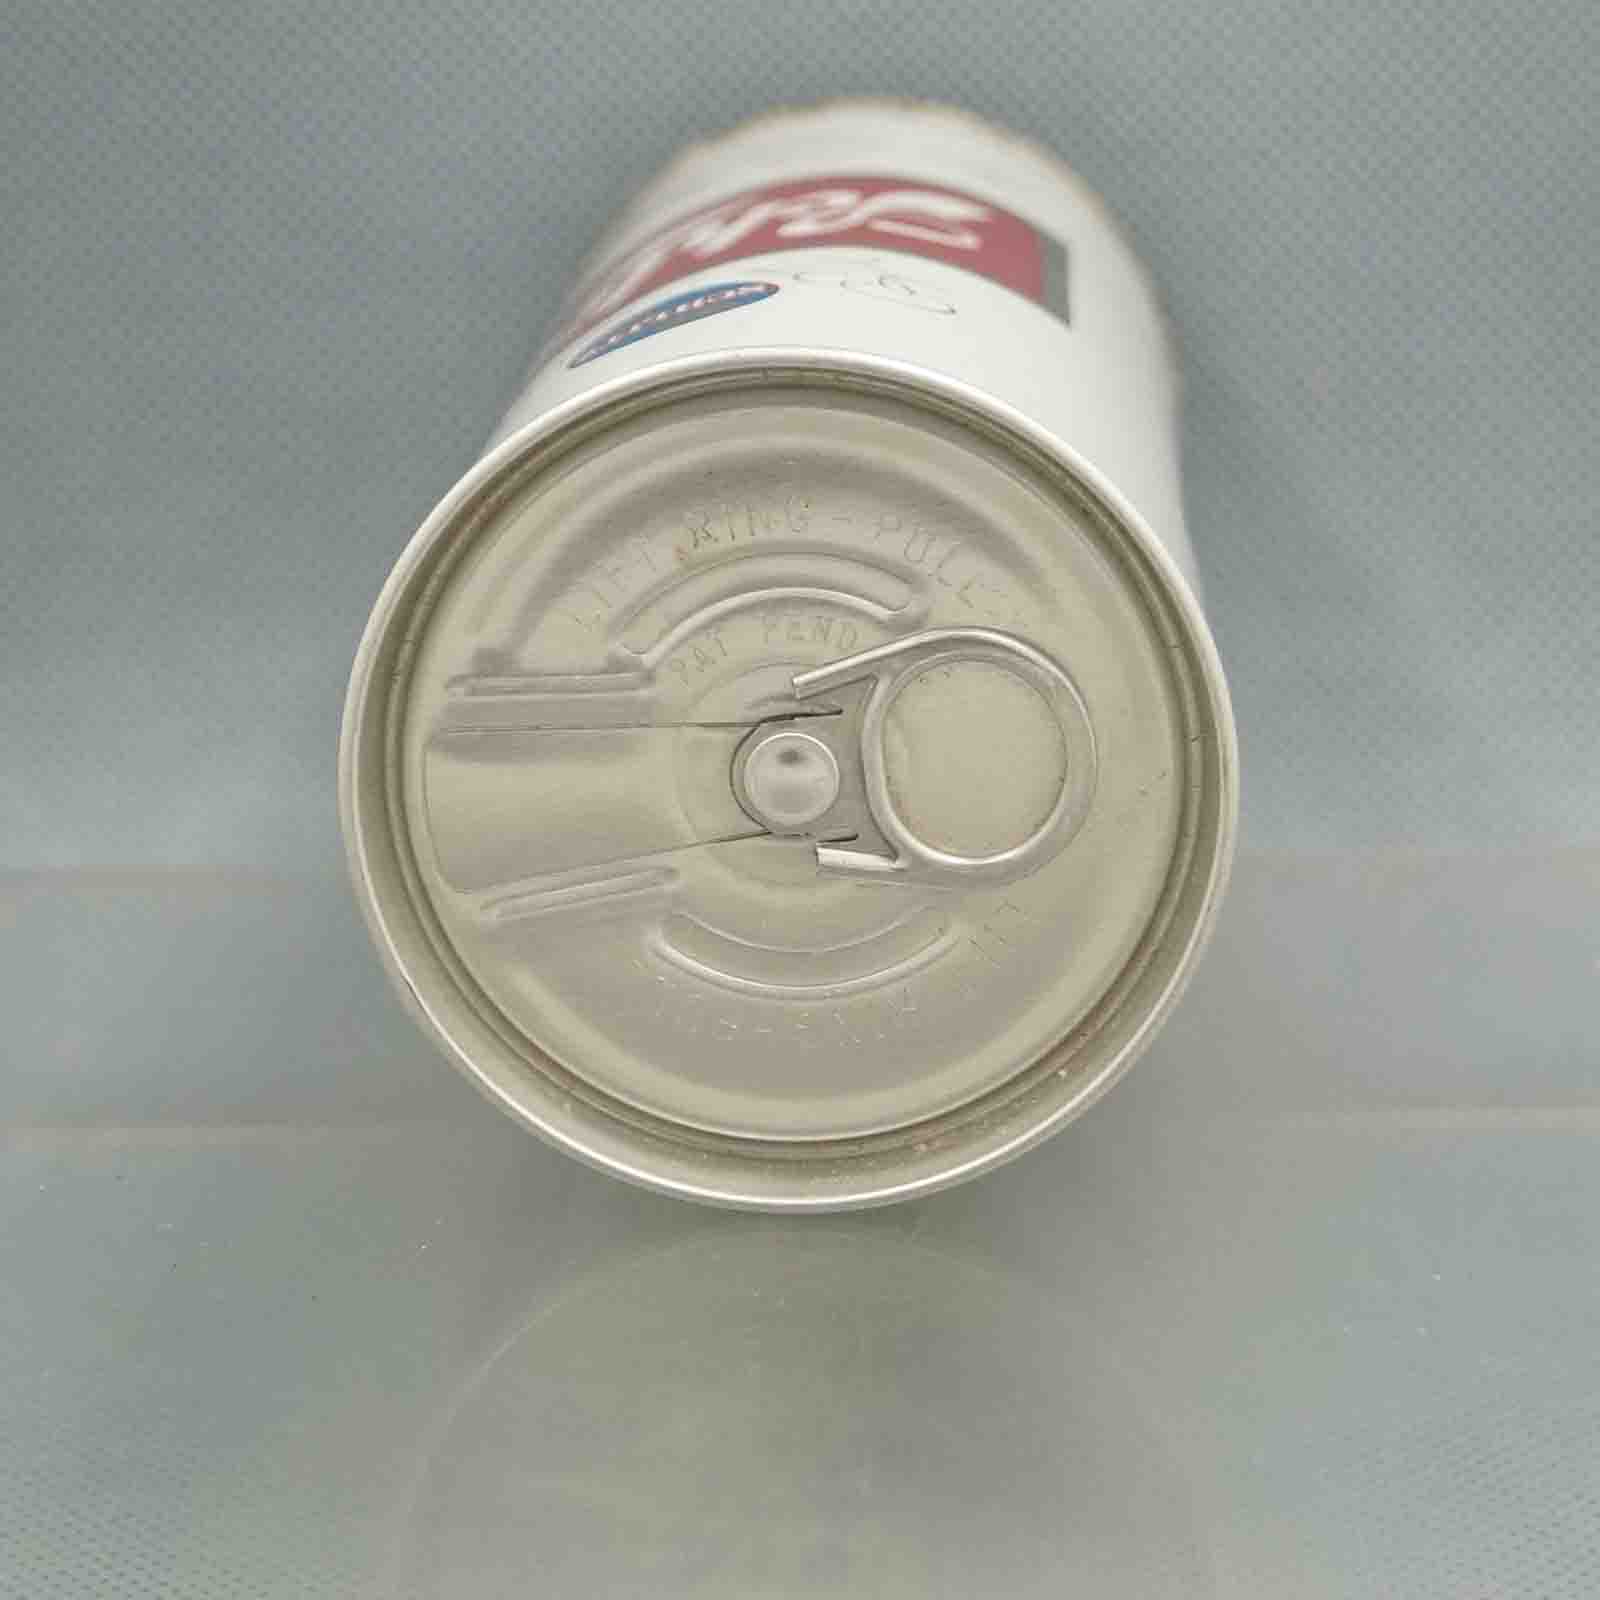 schlitz 165-27 pull tab beer can 5